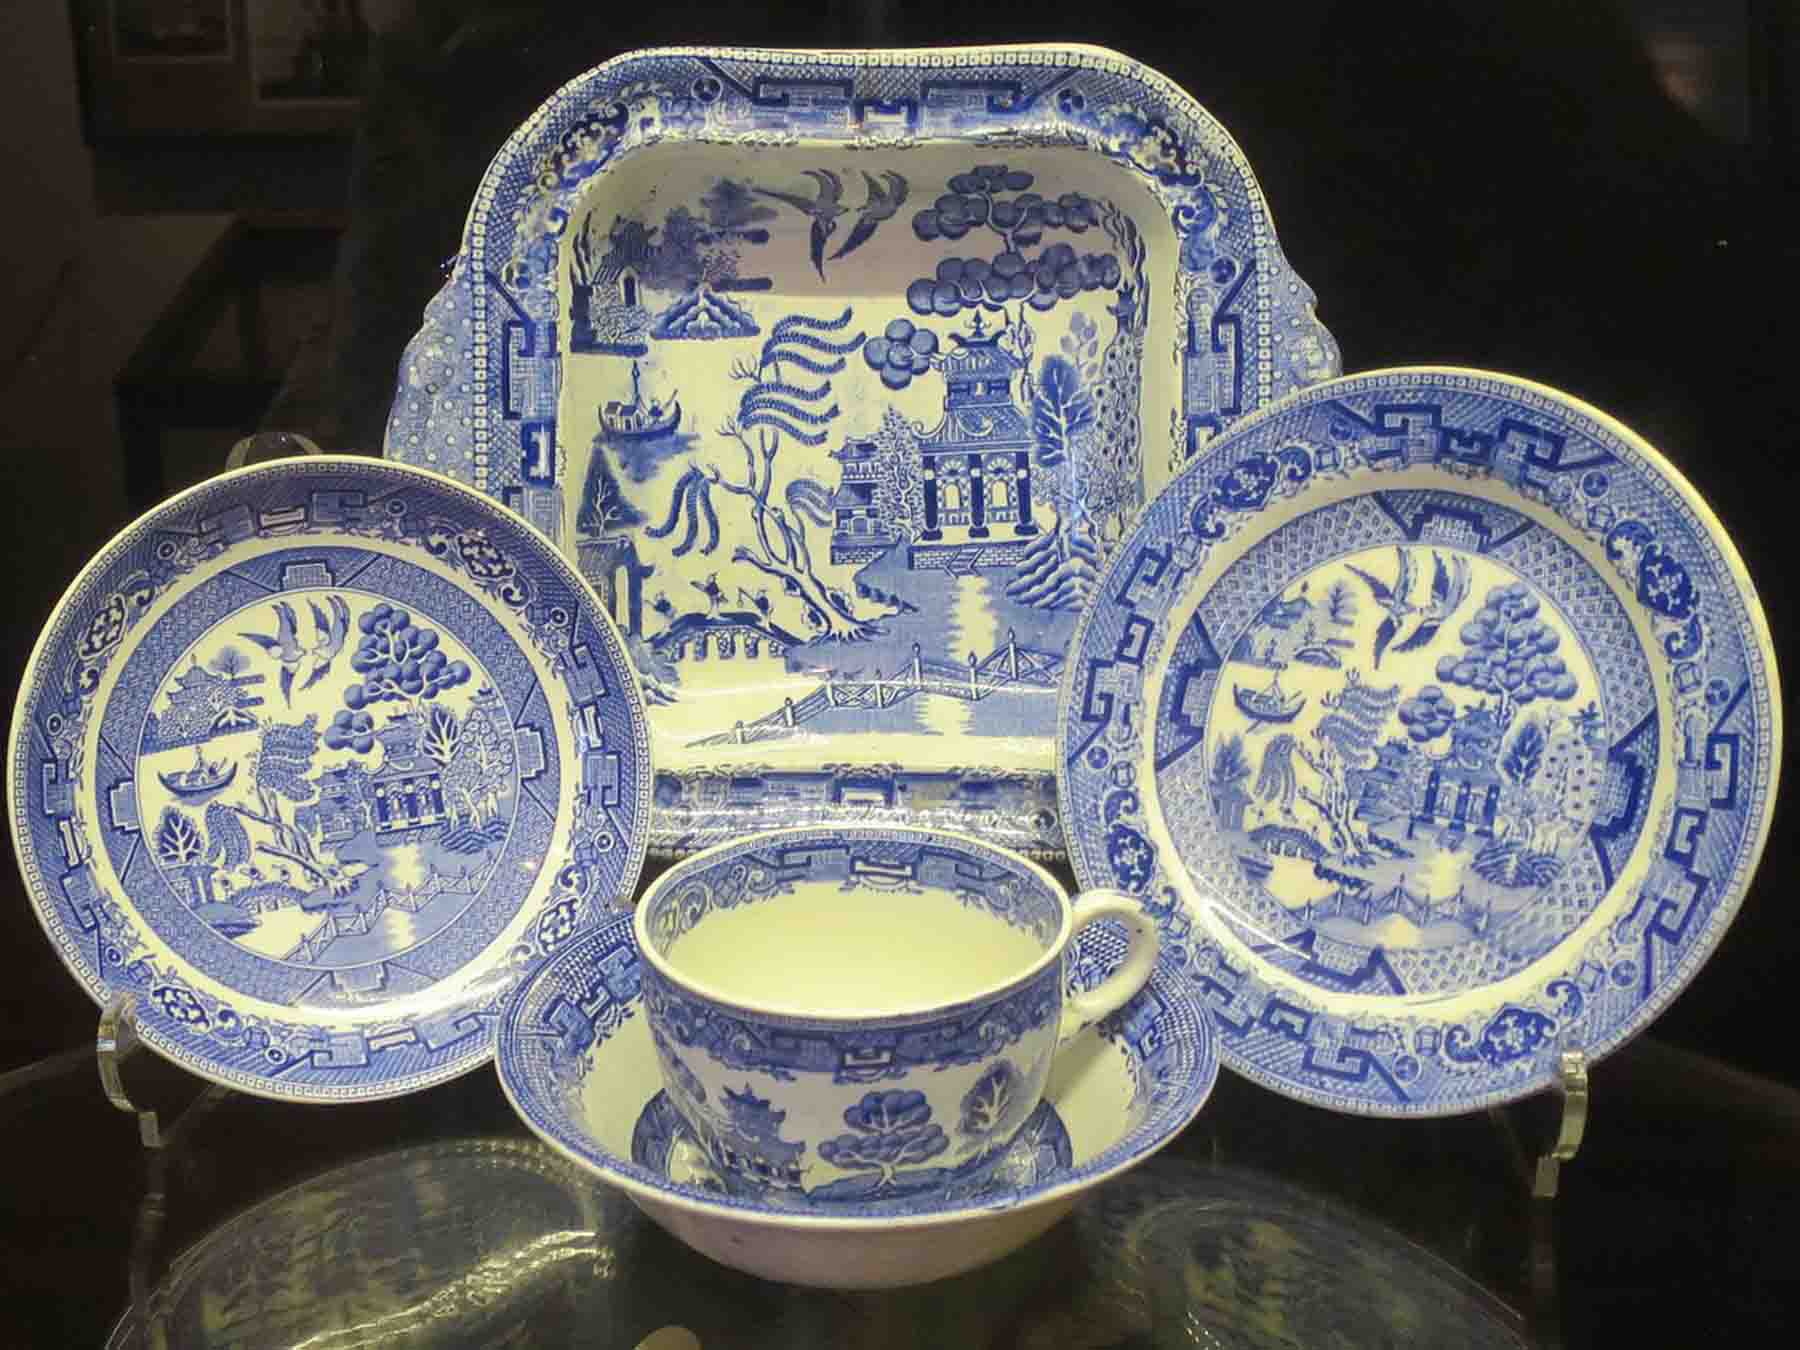 Most Valuable Antique Dishes 6 